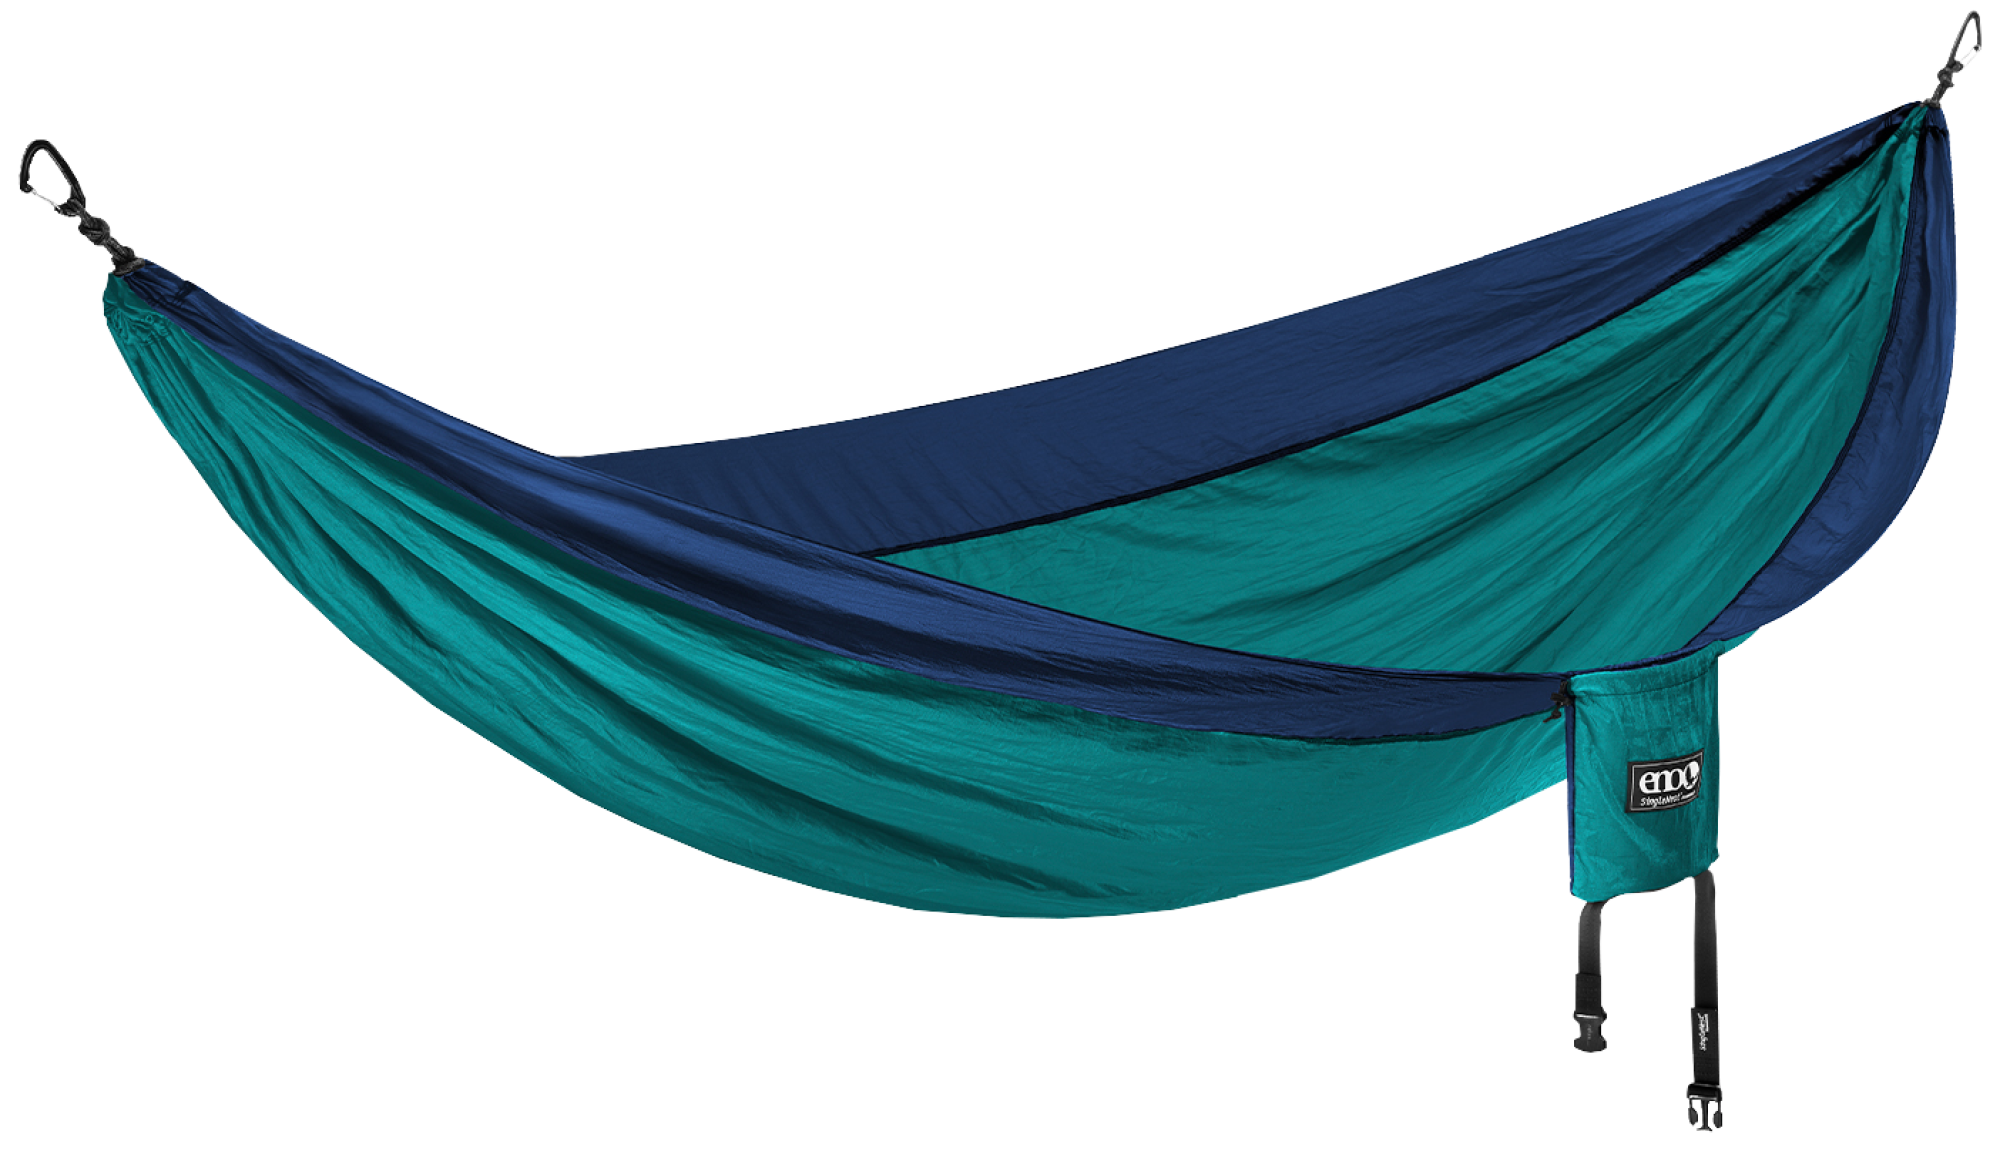 Portable Hammock in green and blue from ENO SingleNest